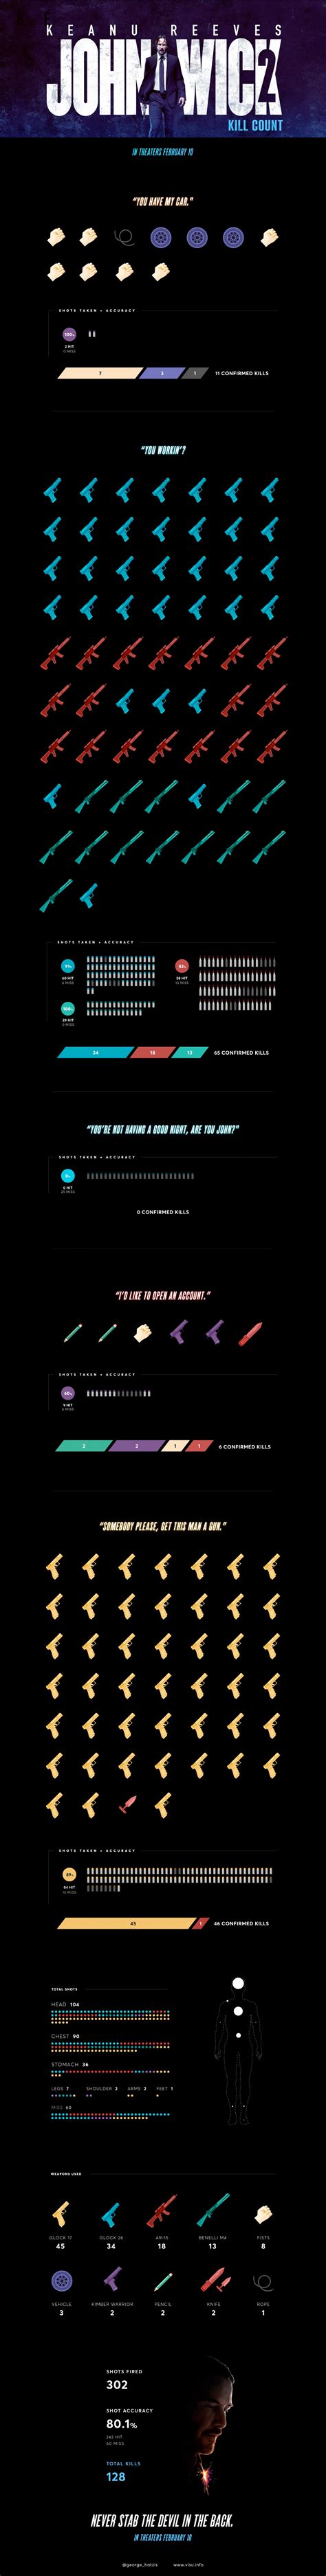 John Wick 2 Kill Count Infographic Breaks Down Every Shot Fired Hot